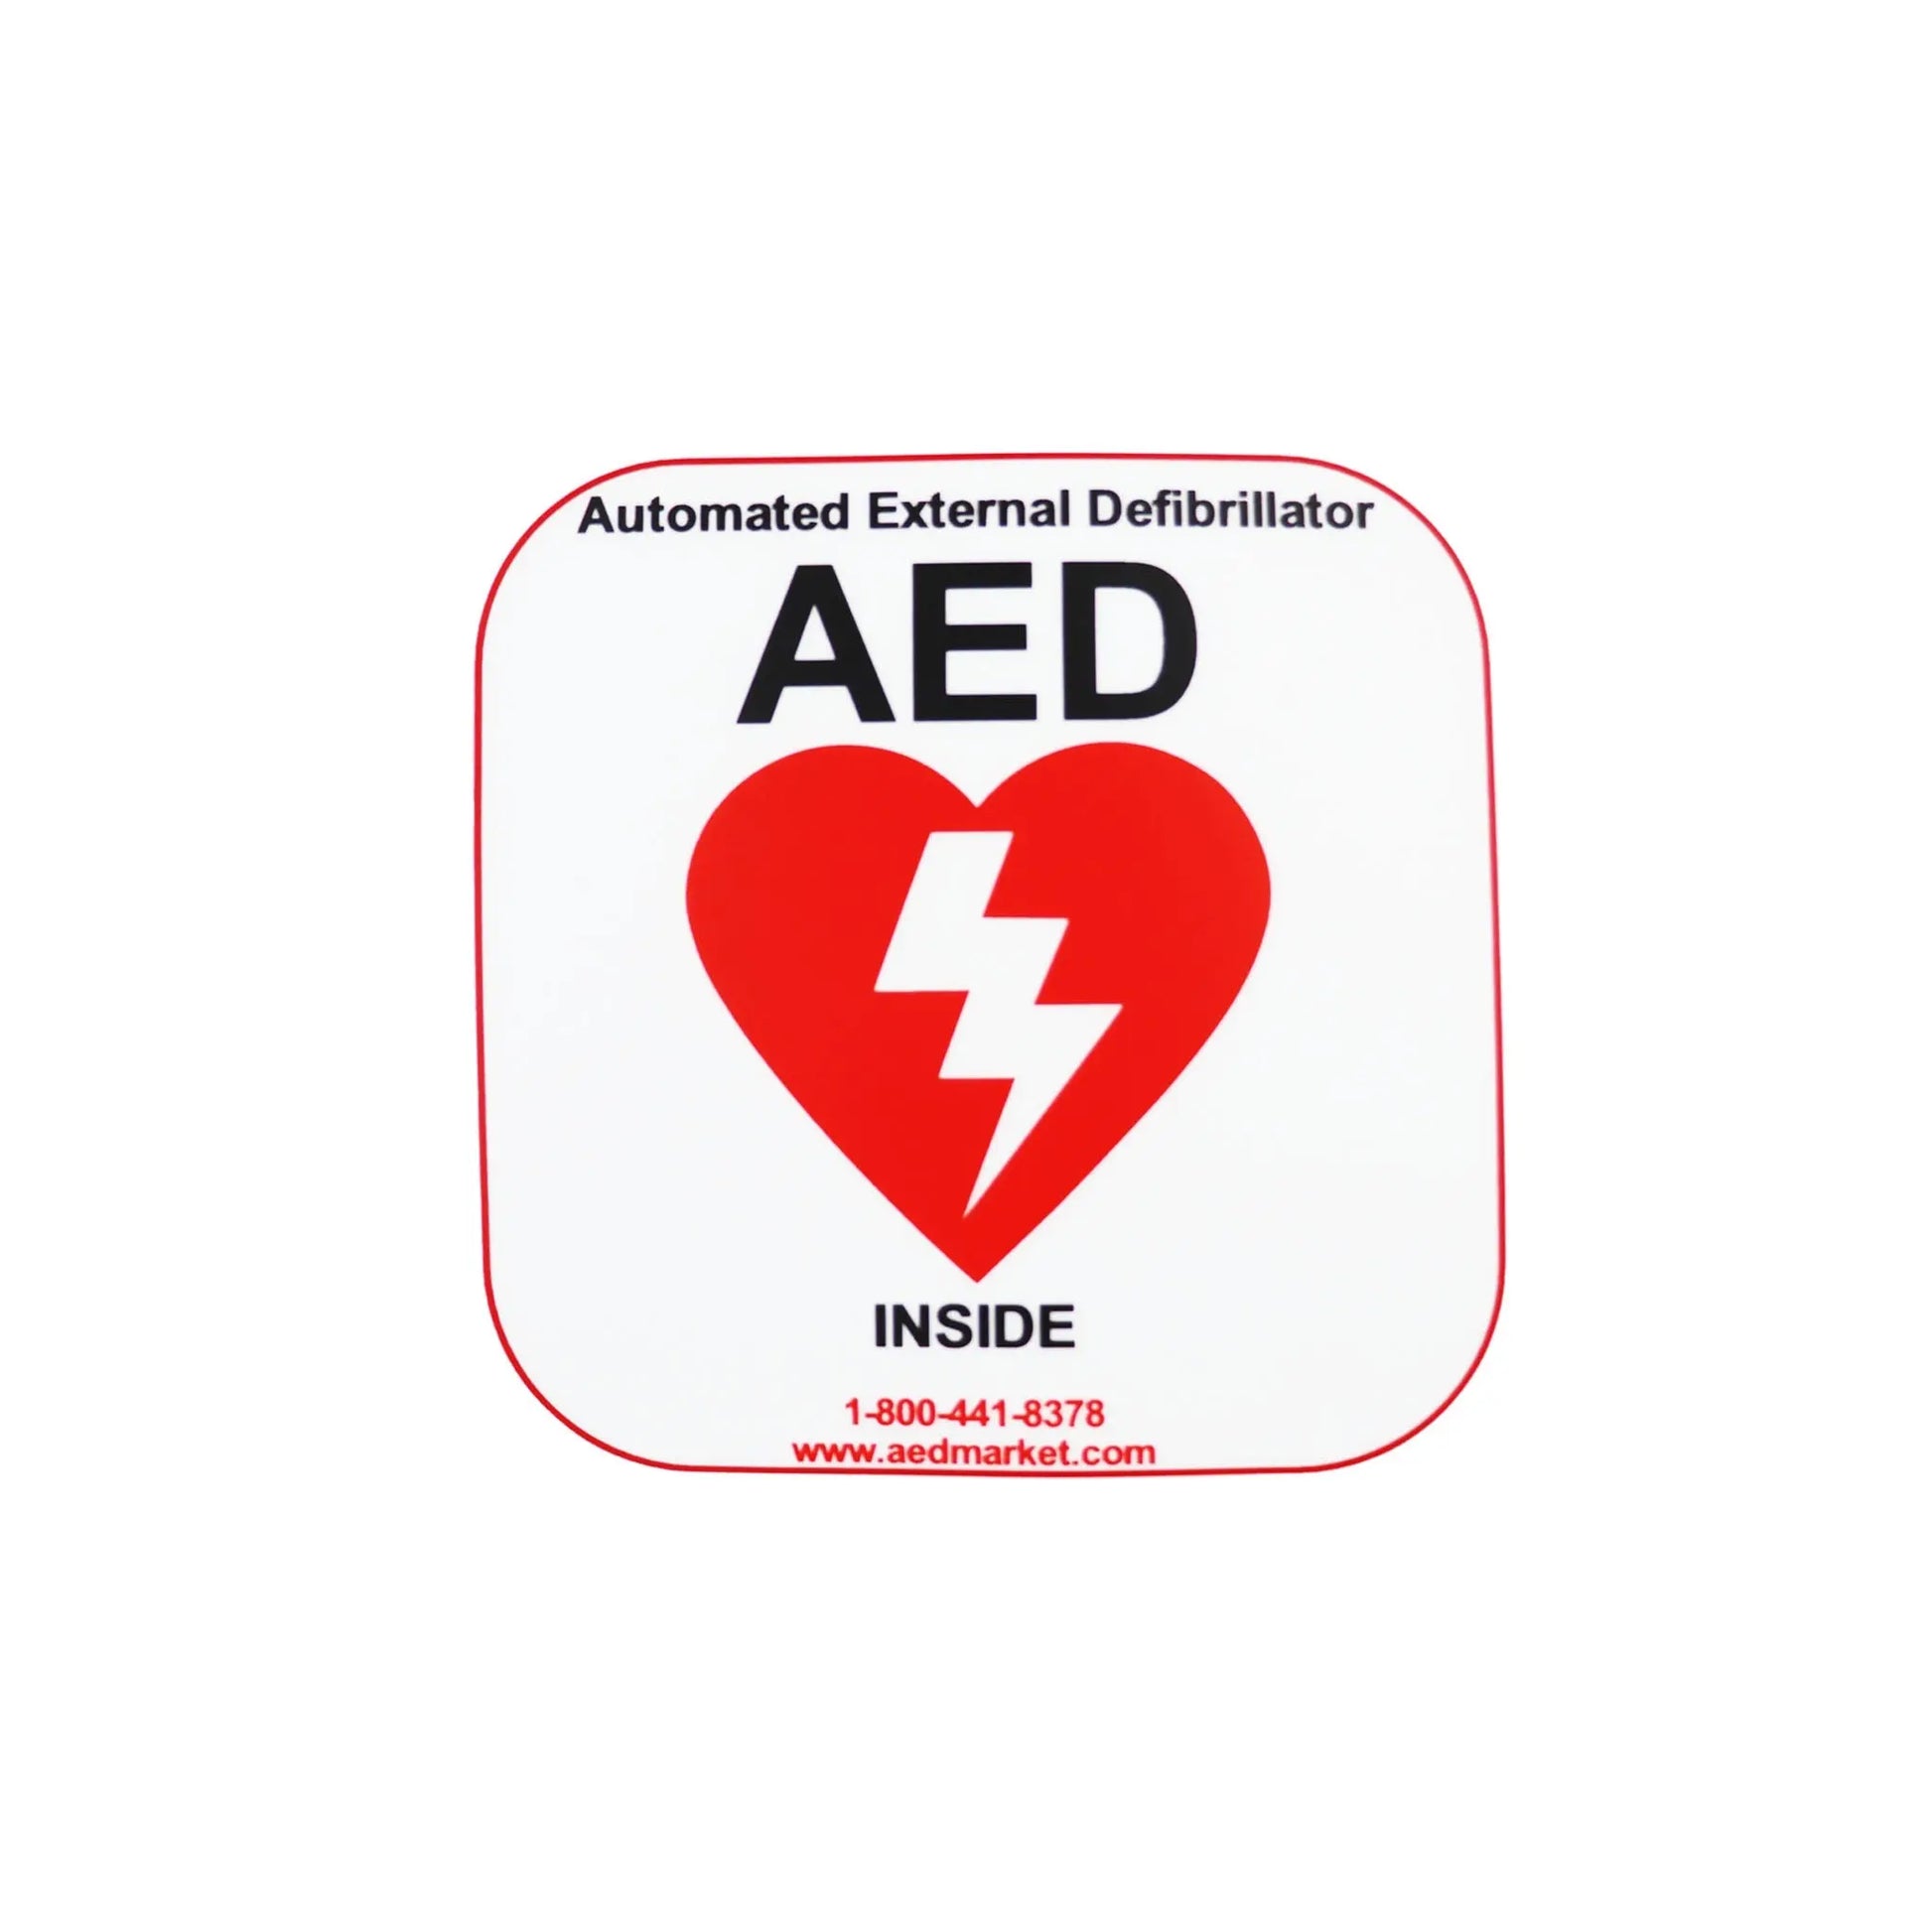 Defibtech Lifeline View - New AED Value Package - First Aid Market